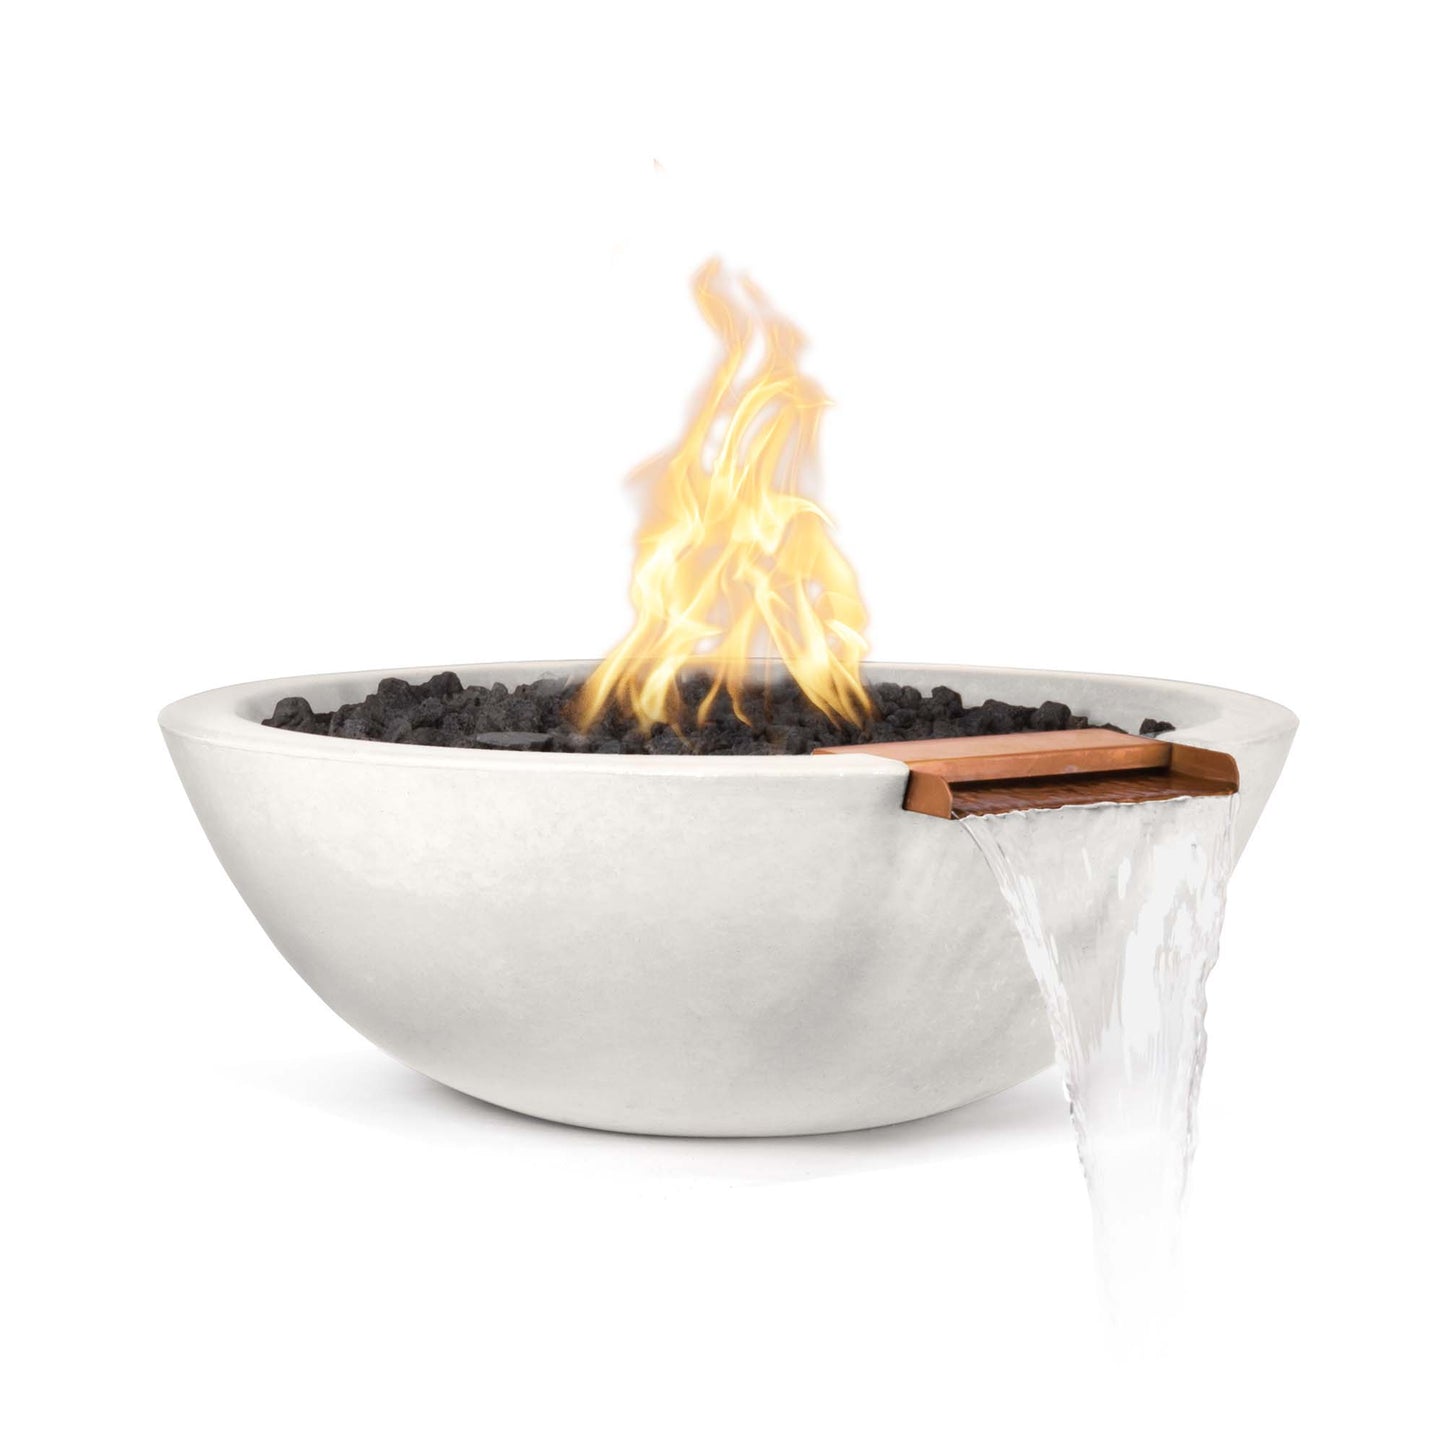 The Outdoor Plus Round Sedona 33" Metallic Bronze GFRC Concrete Liquid Propane Fire & Water Bowl with Match Lit with Flame Sense Ignition